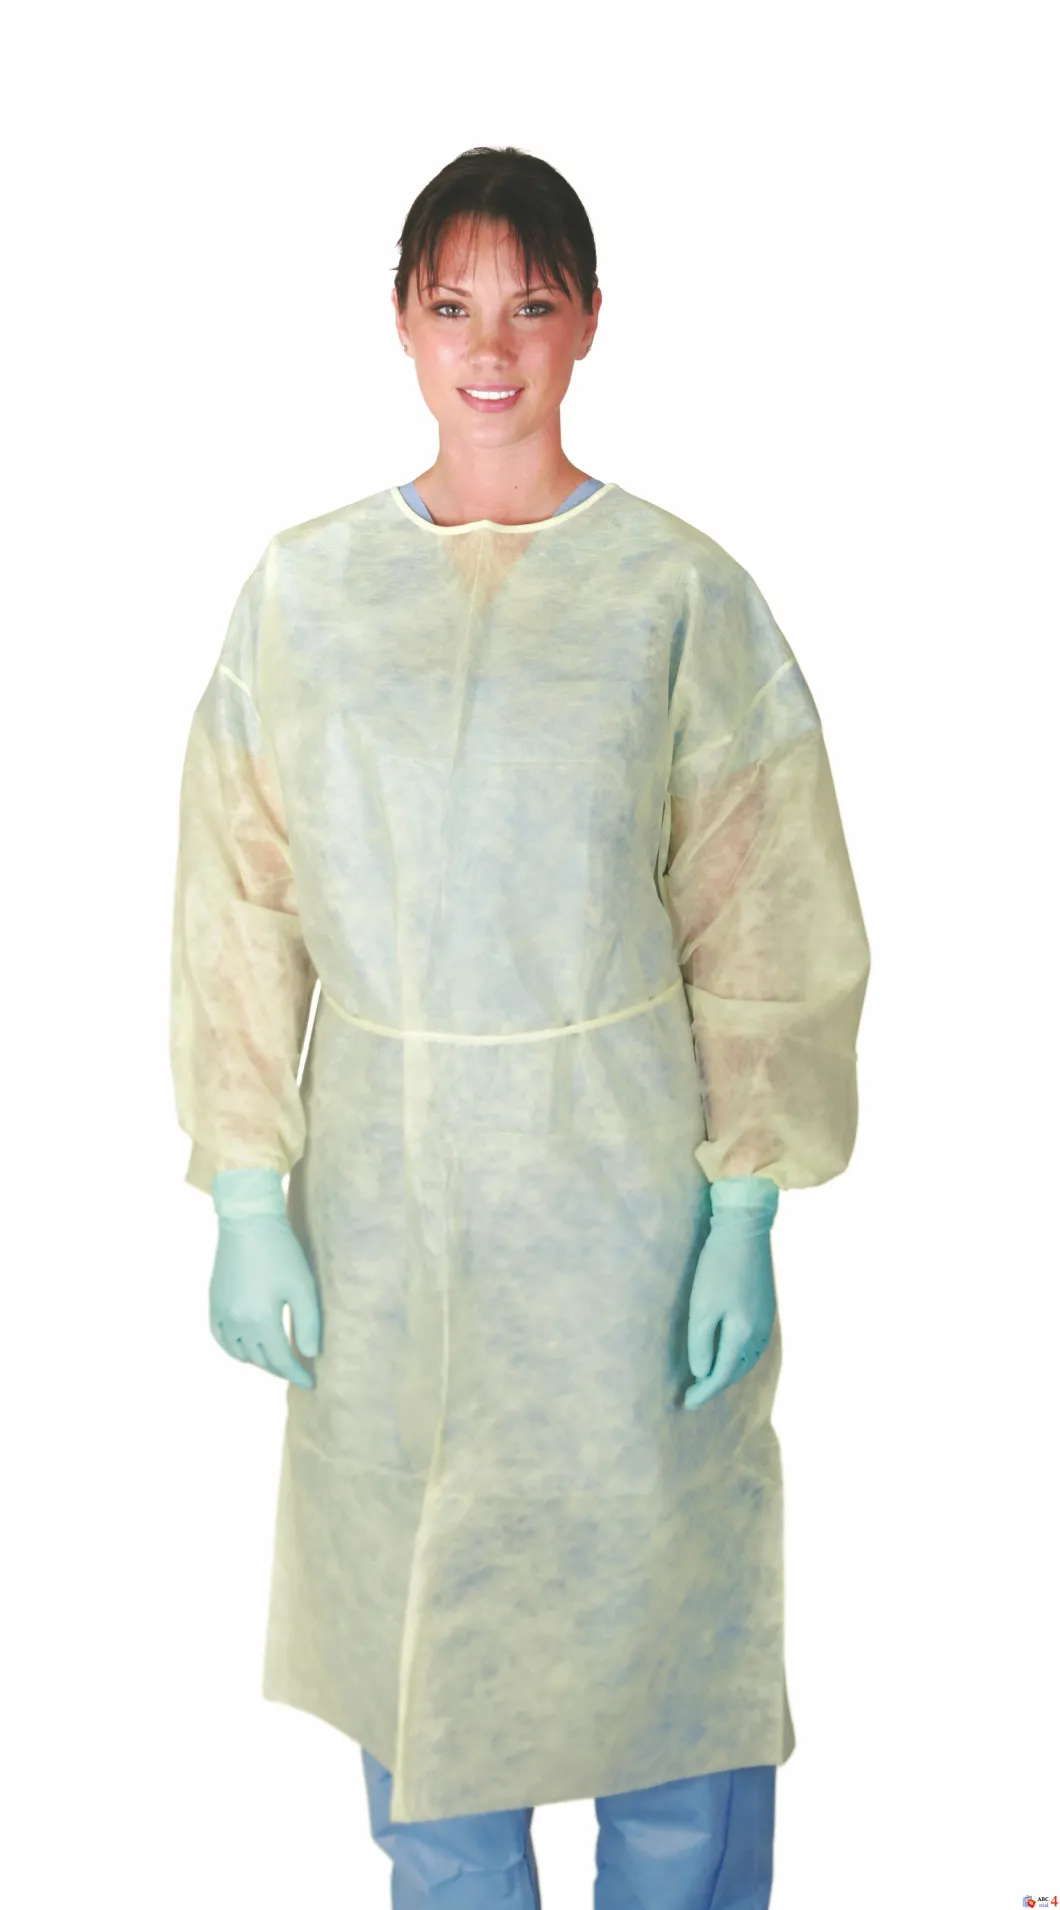 Manufacturer Hospital Ce Certified Isolation Coverall Protective Protection Suits Gowns